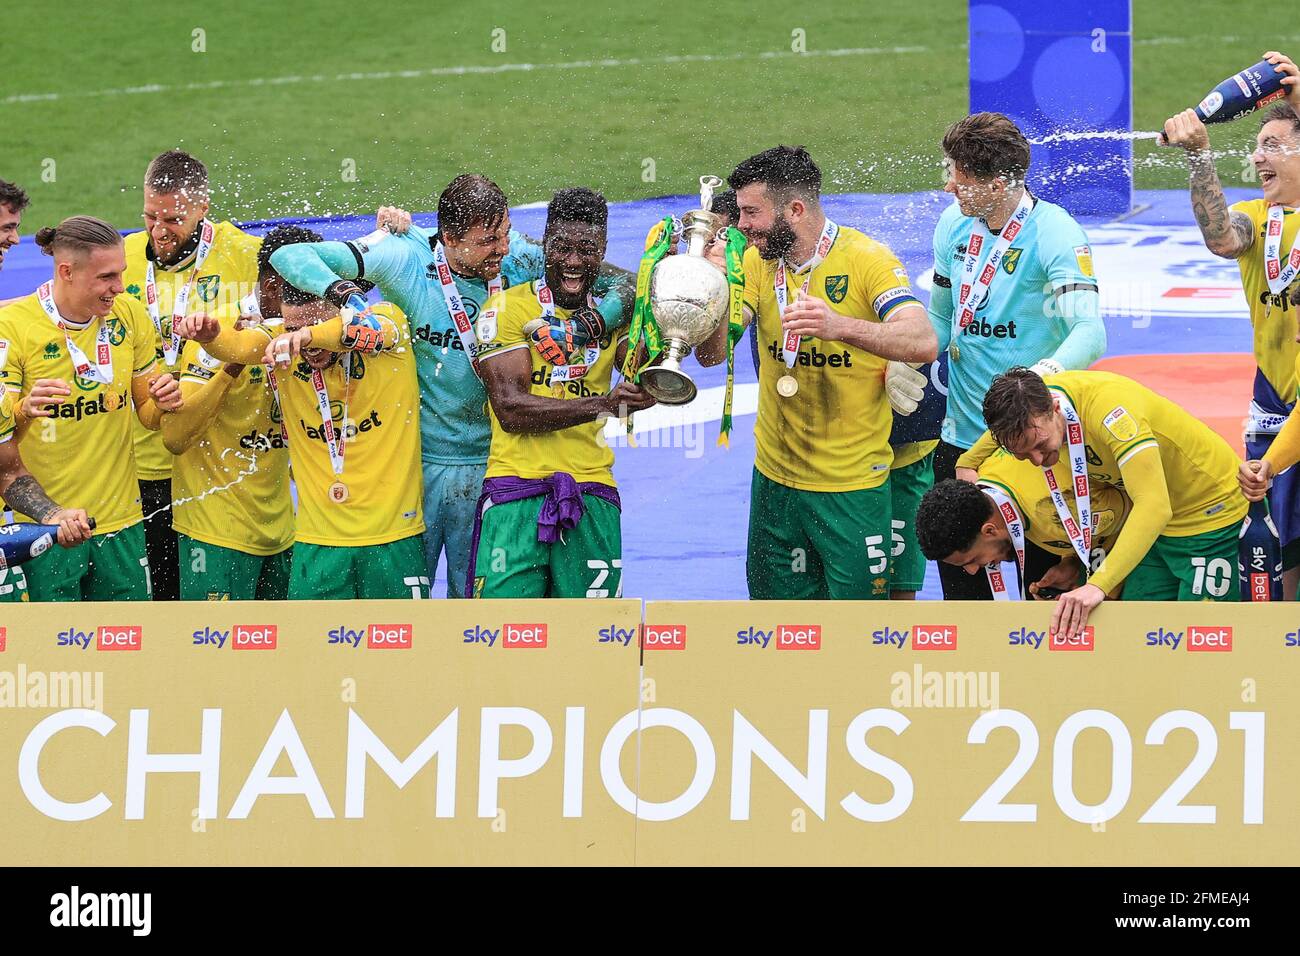 Alexander Tettey #27 of Norwich City and Grant Hanley #5 of Norwich City lift the trophy after being crowned the Sky Bet Championship league winners Stock Photo